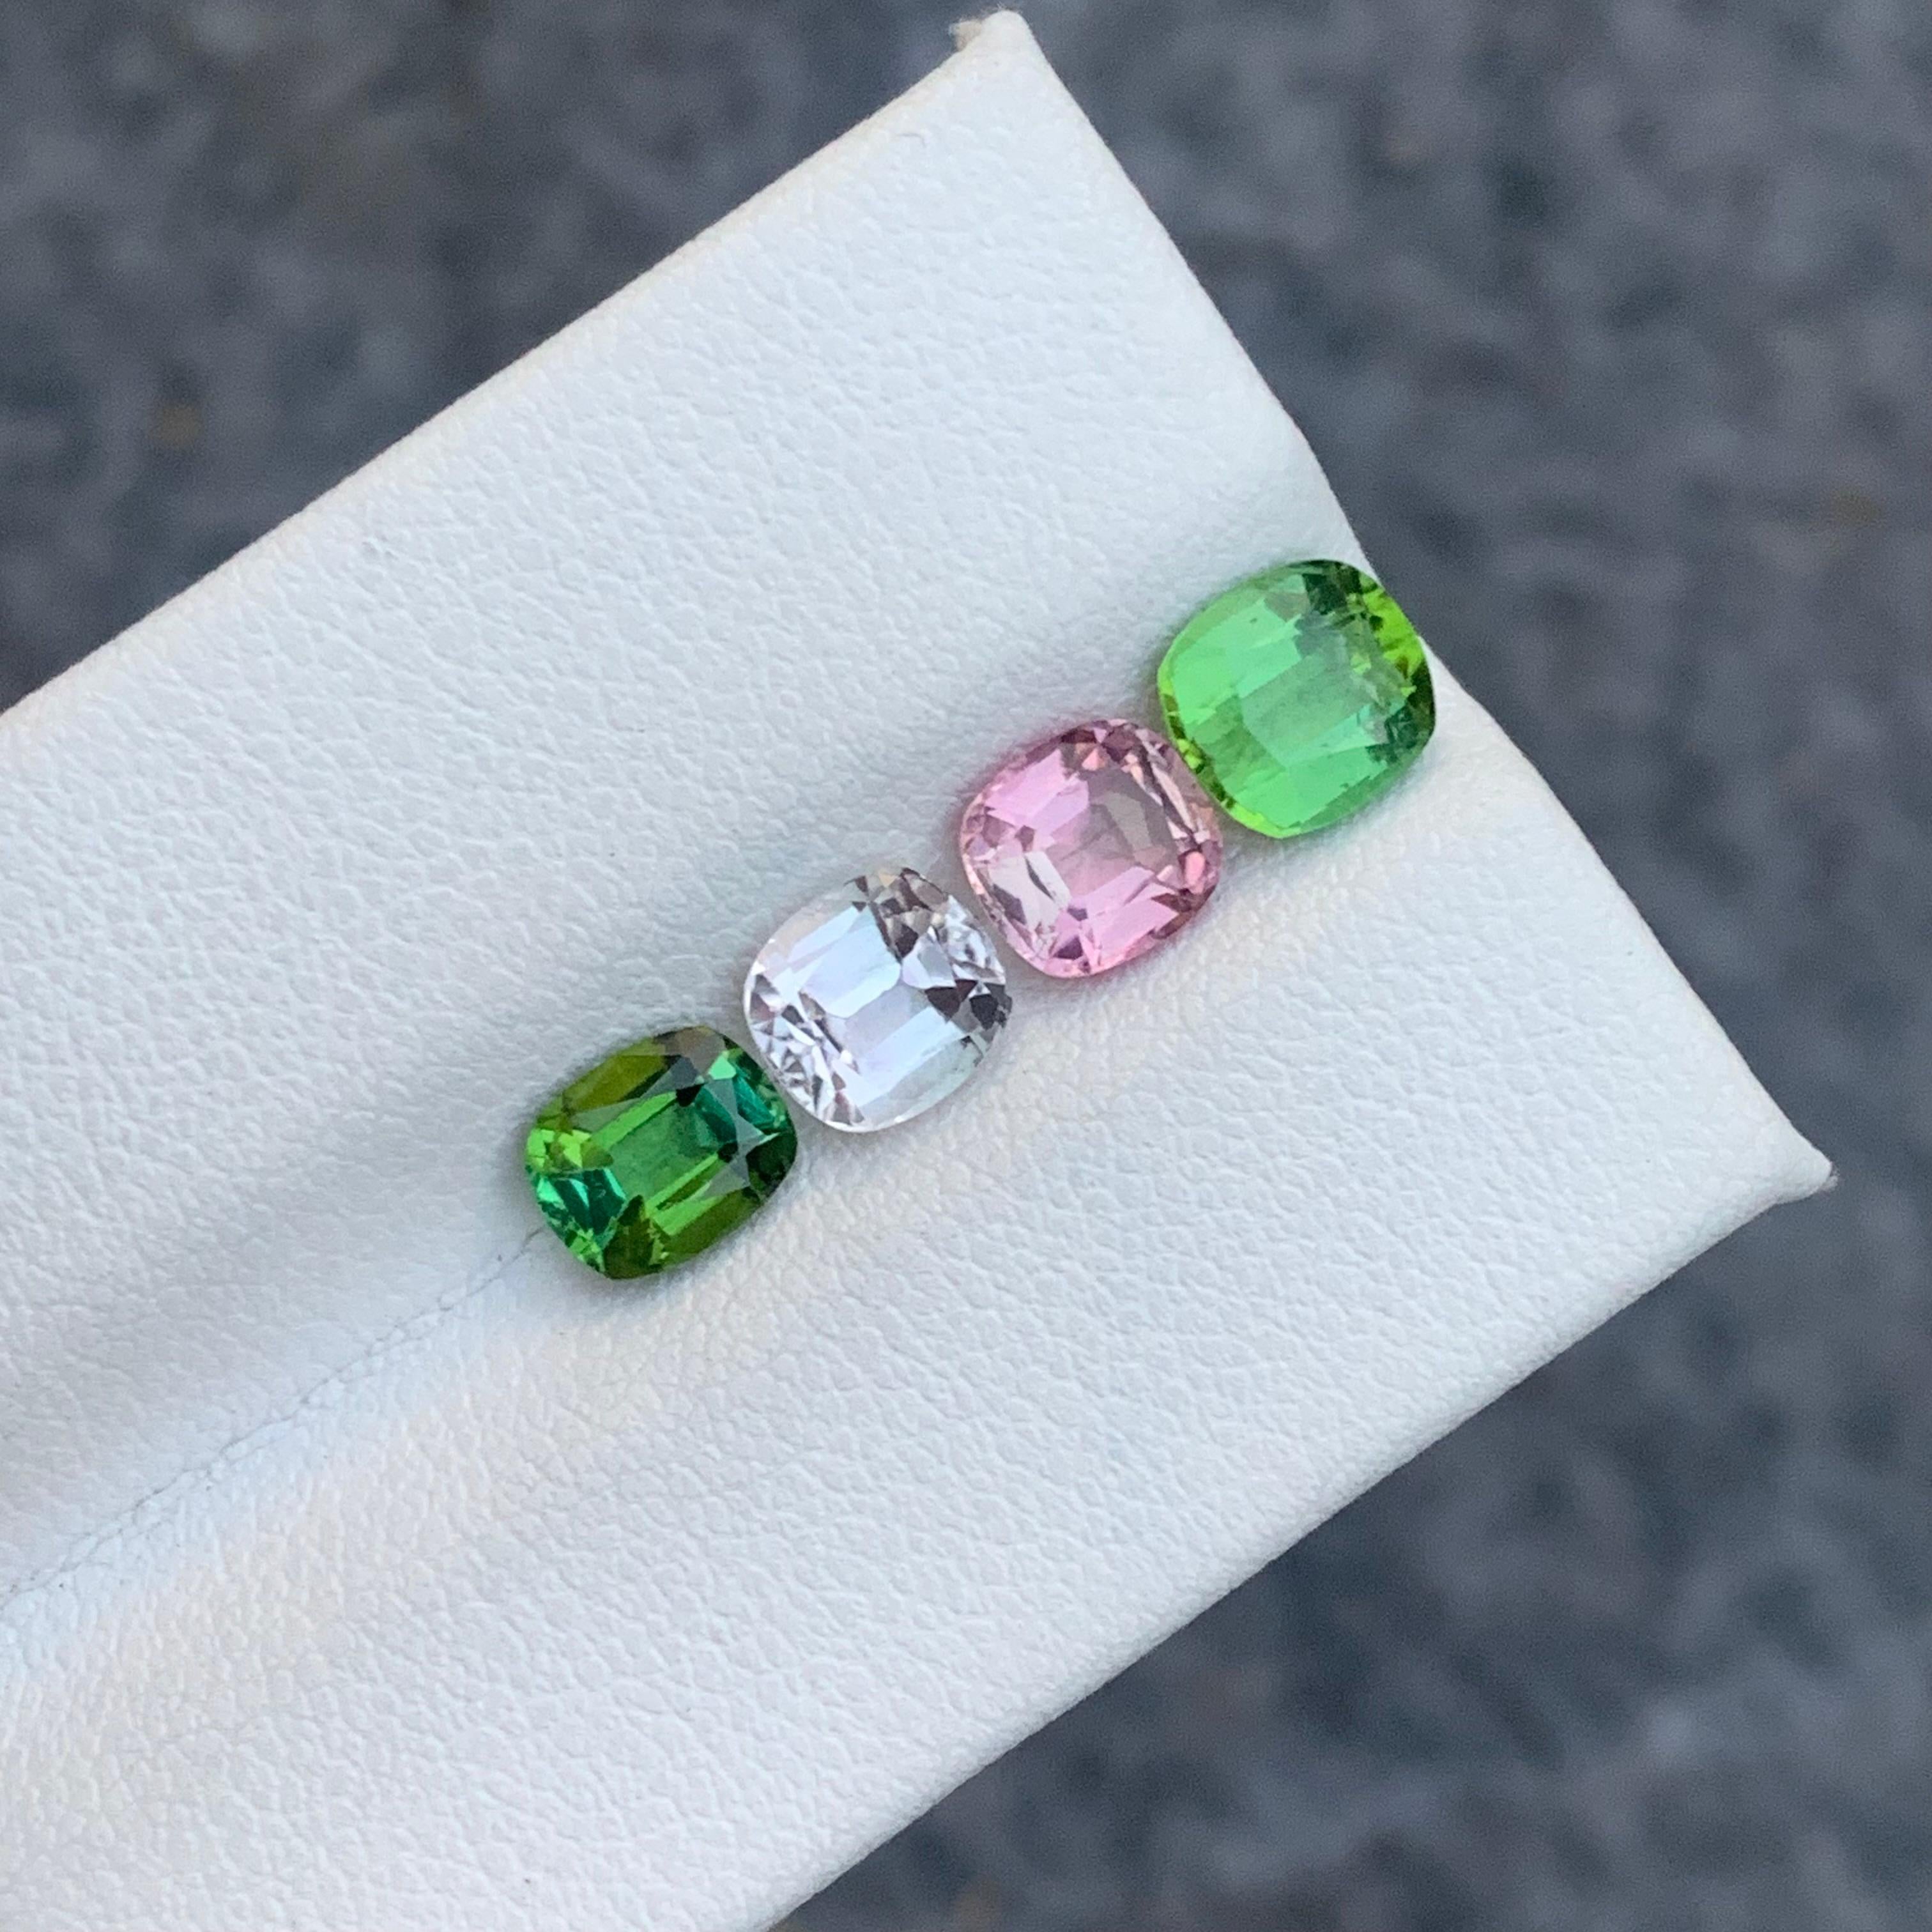 Gemstone Type : Tourmaline
Weight : 3.90 Carats
Size: 0.90 to 1.15 Carat
Origin : Kunar Afghanistan
Clarity : Eye Clean
Shape: Cushion 
Color: Mint Green, Pink 
Certificate: On Demand
Basically, mint tourmalines are tourmalines with pastel hues of